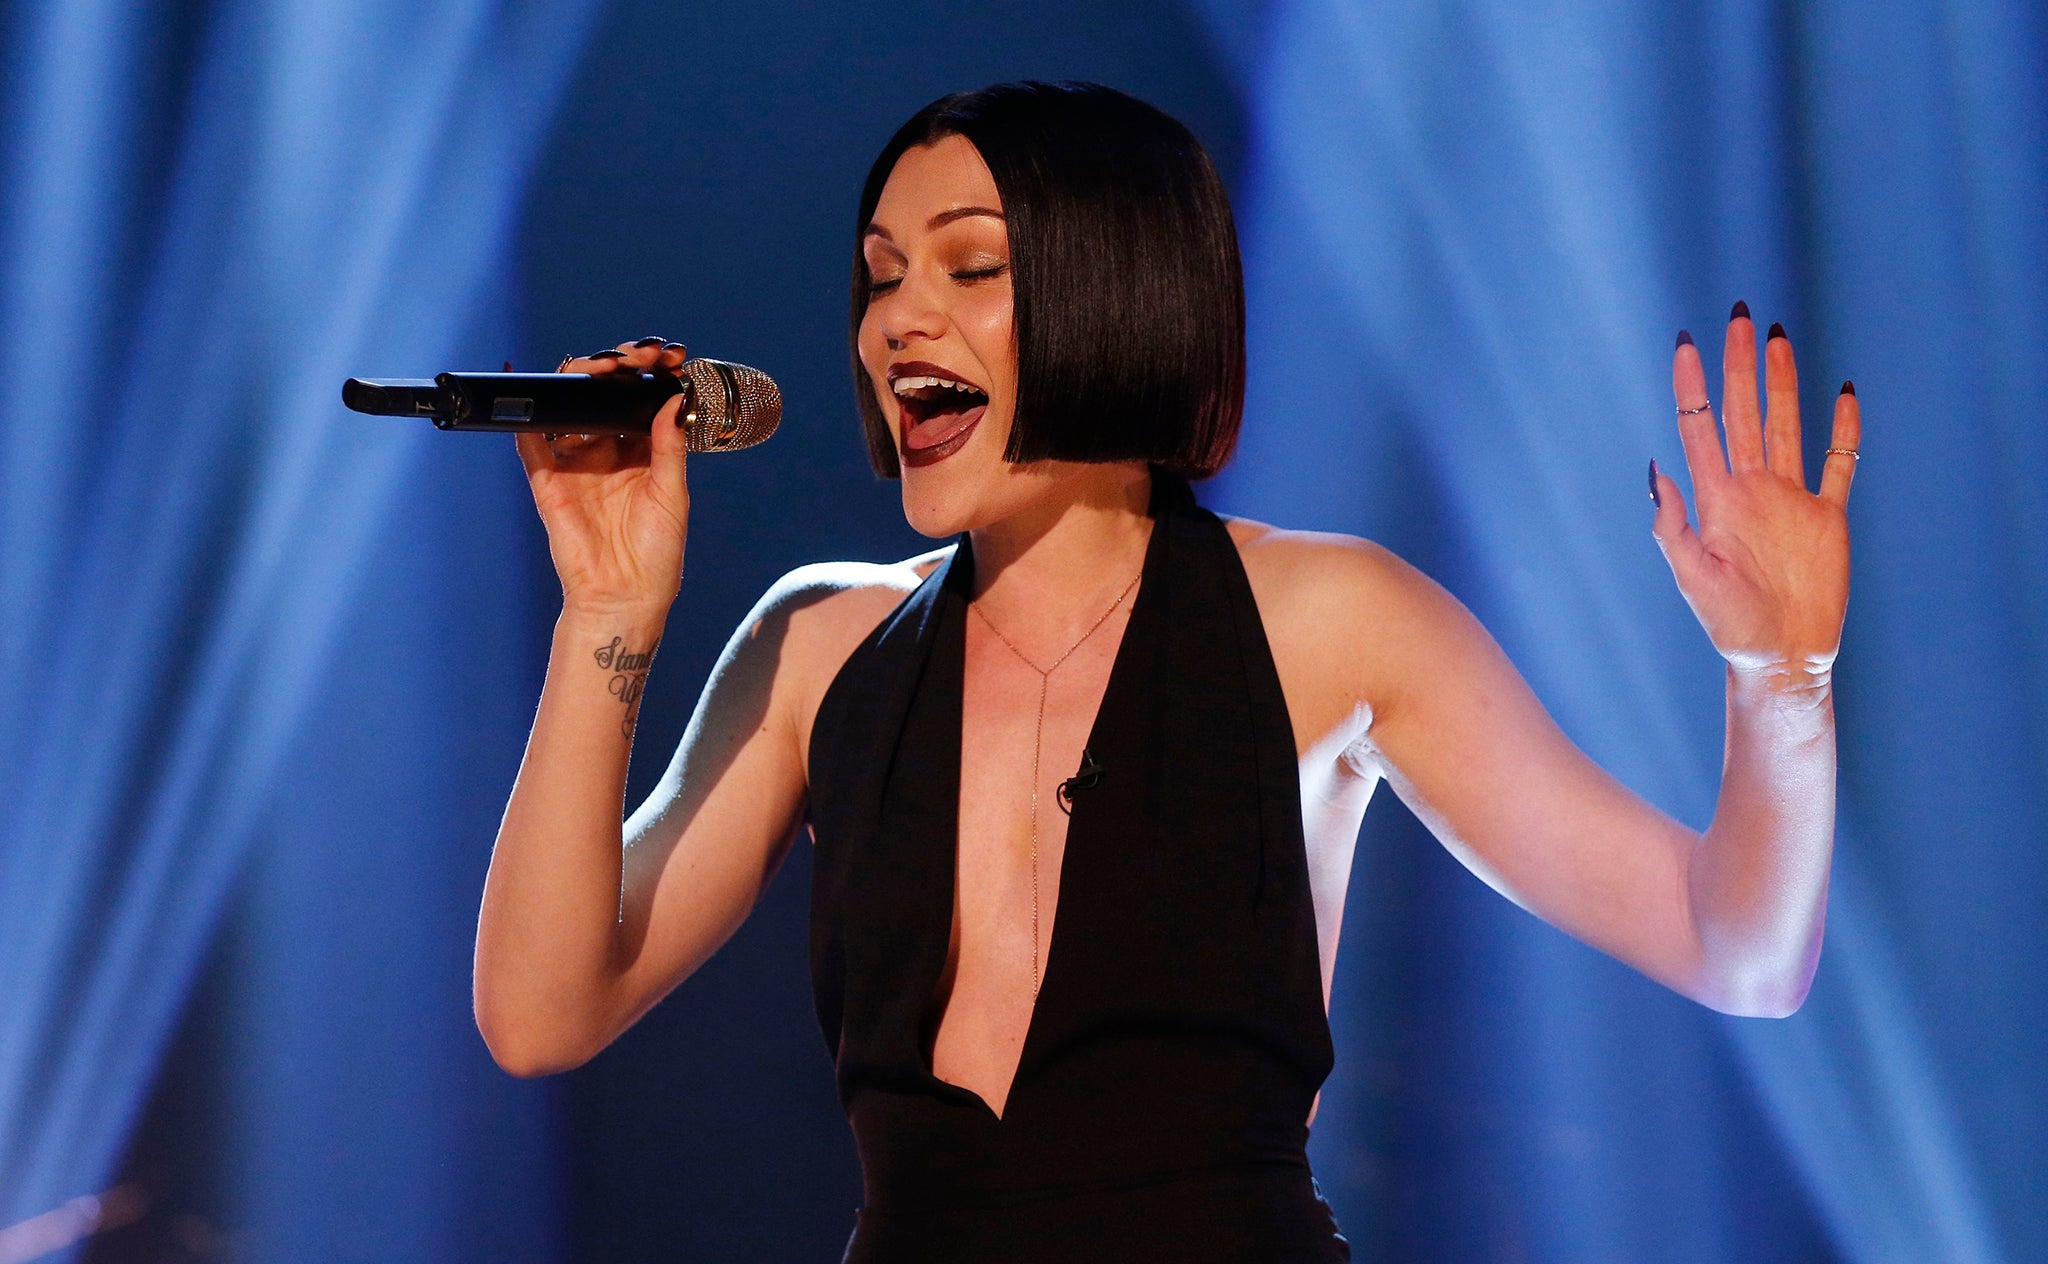 Jessie J performed at the Brixton Academy in London last night